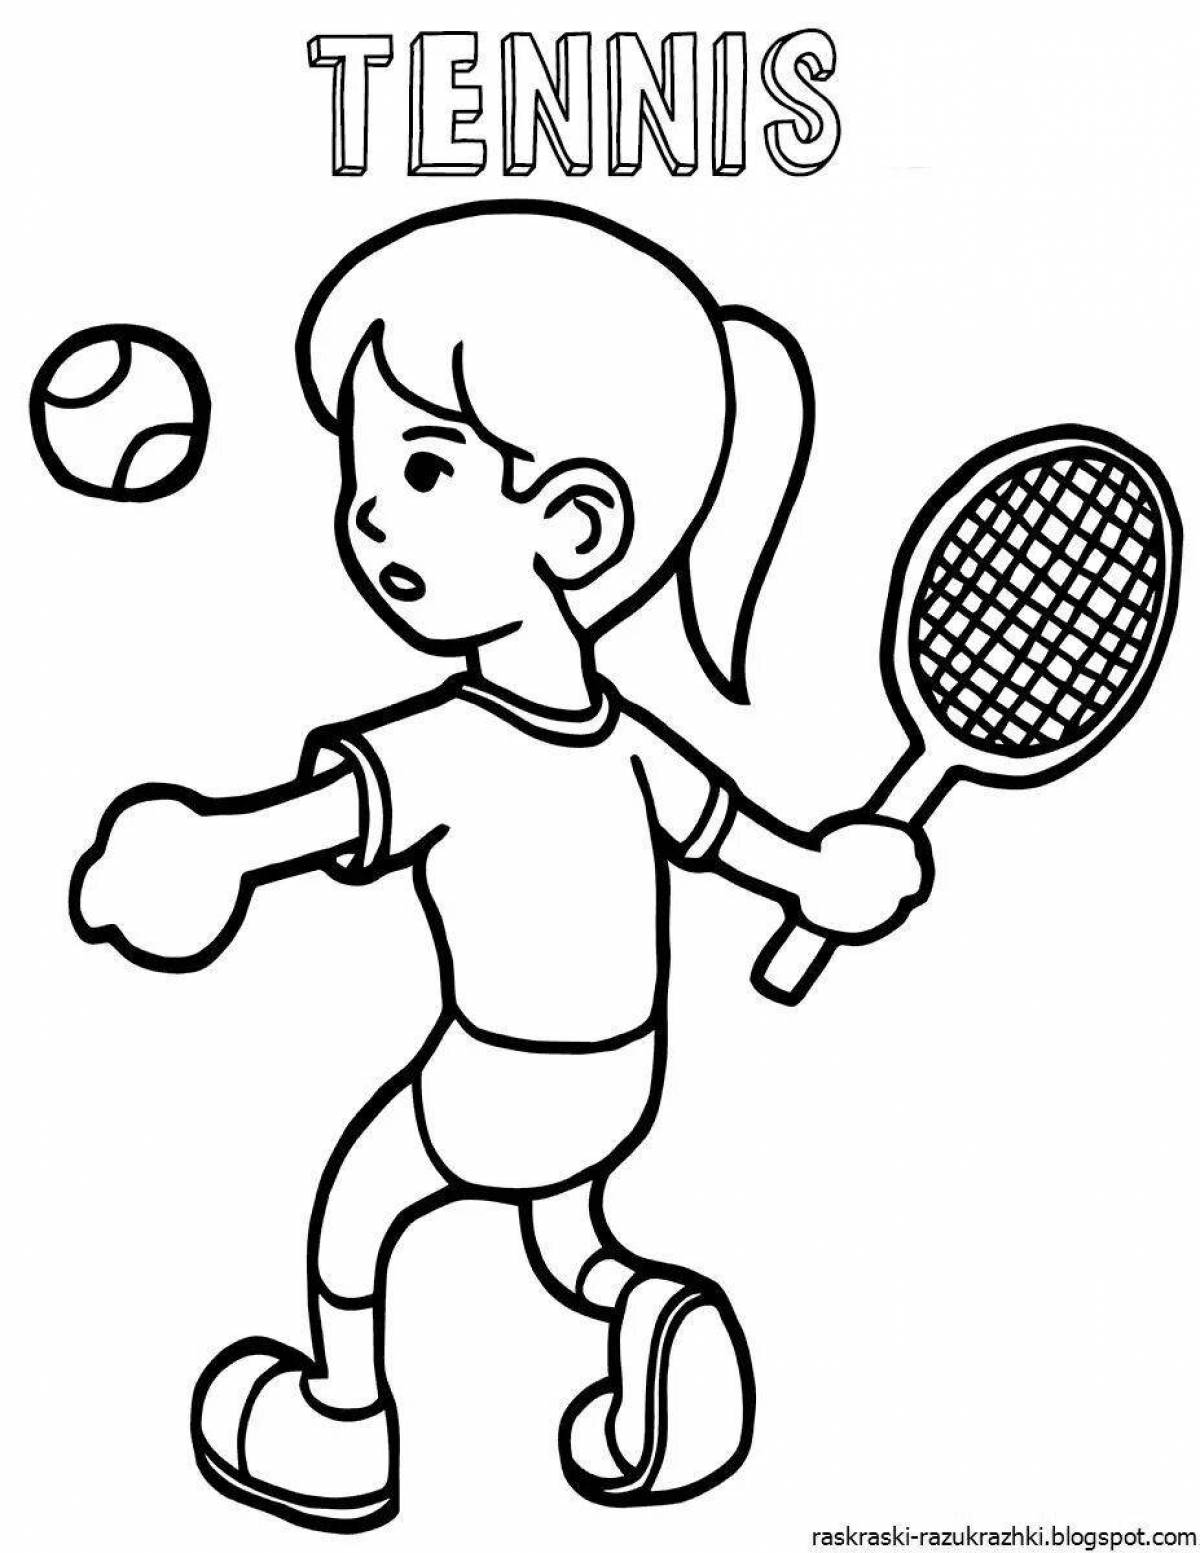 Athletes of different sports for children #9